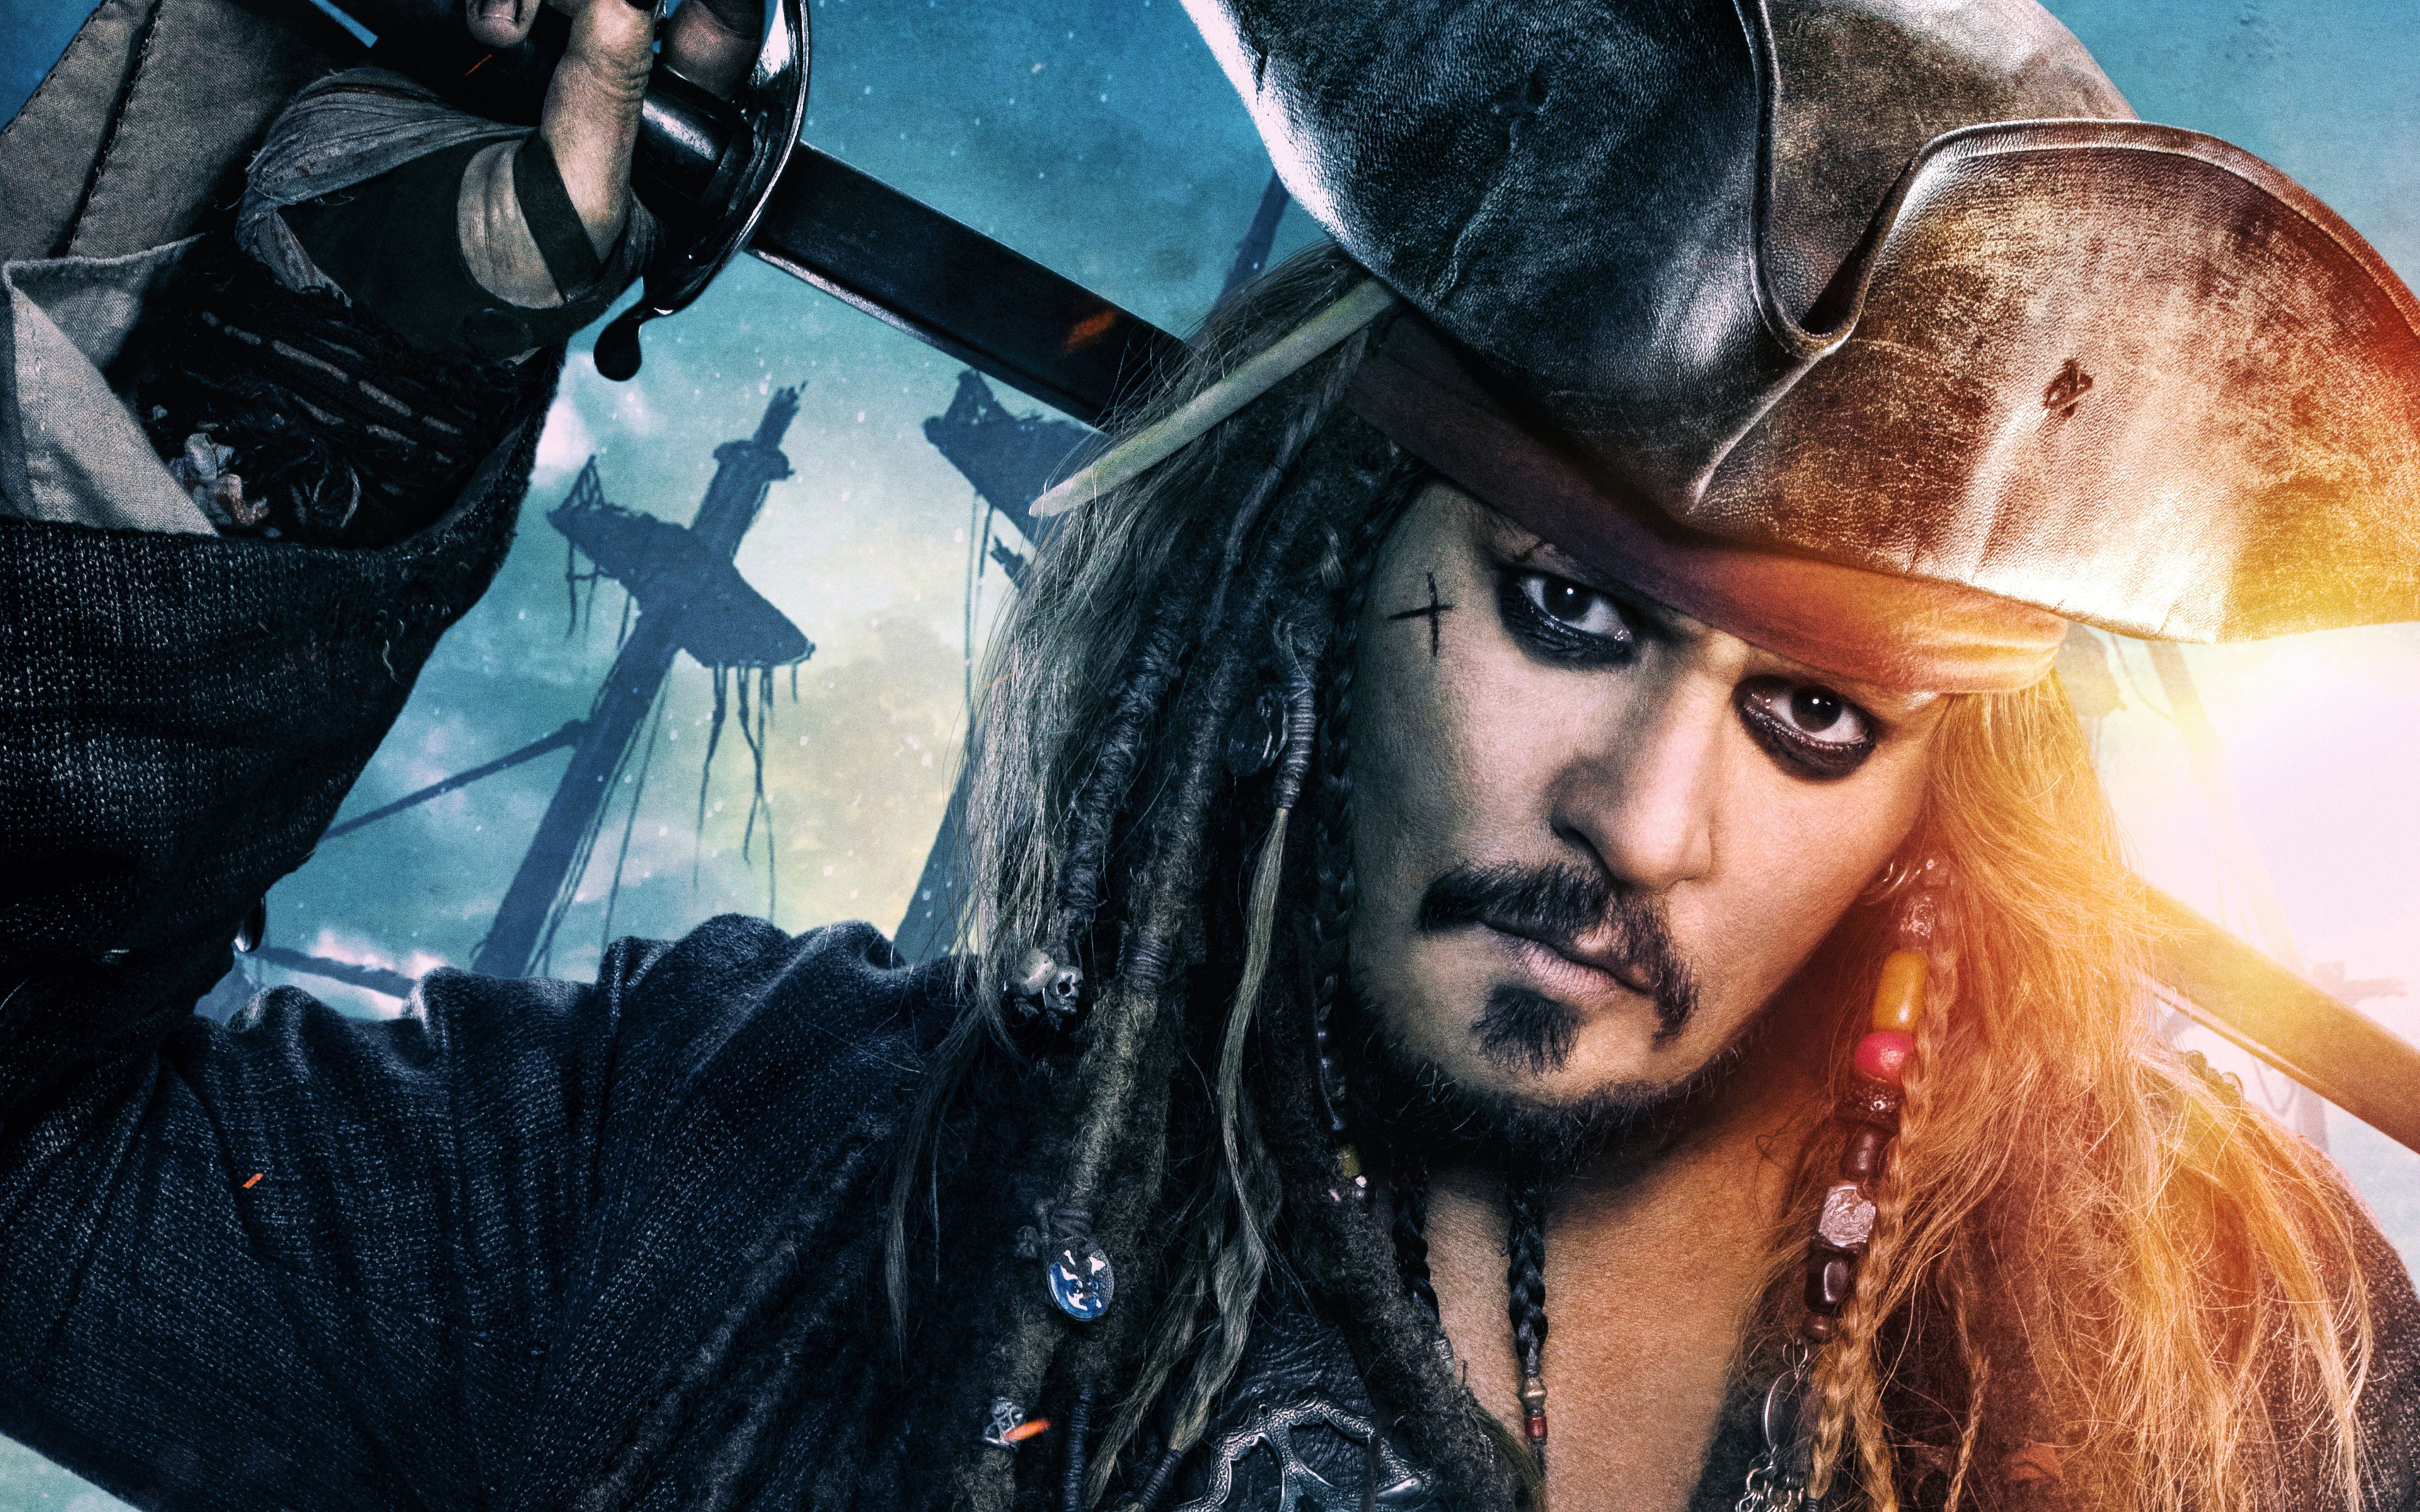 for mac download Pirates of the Caribbean